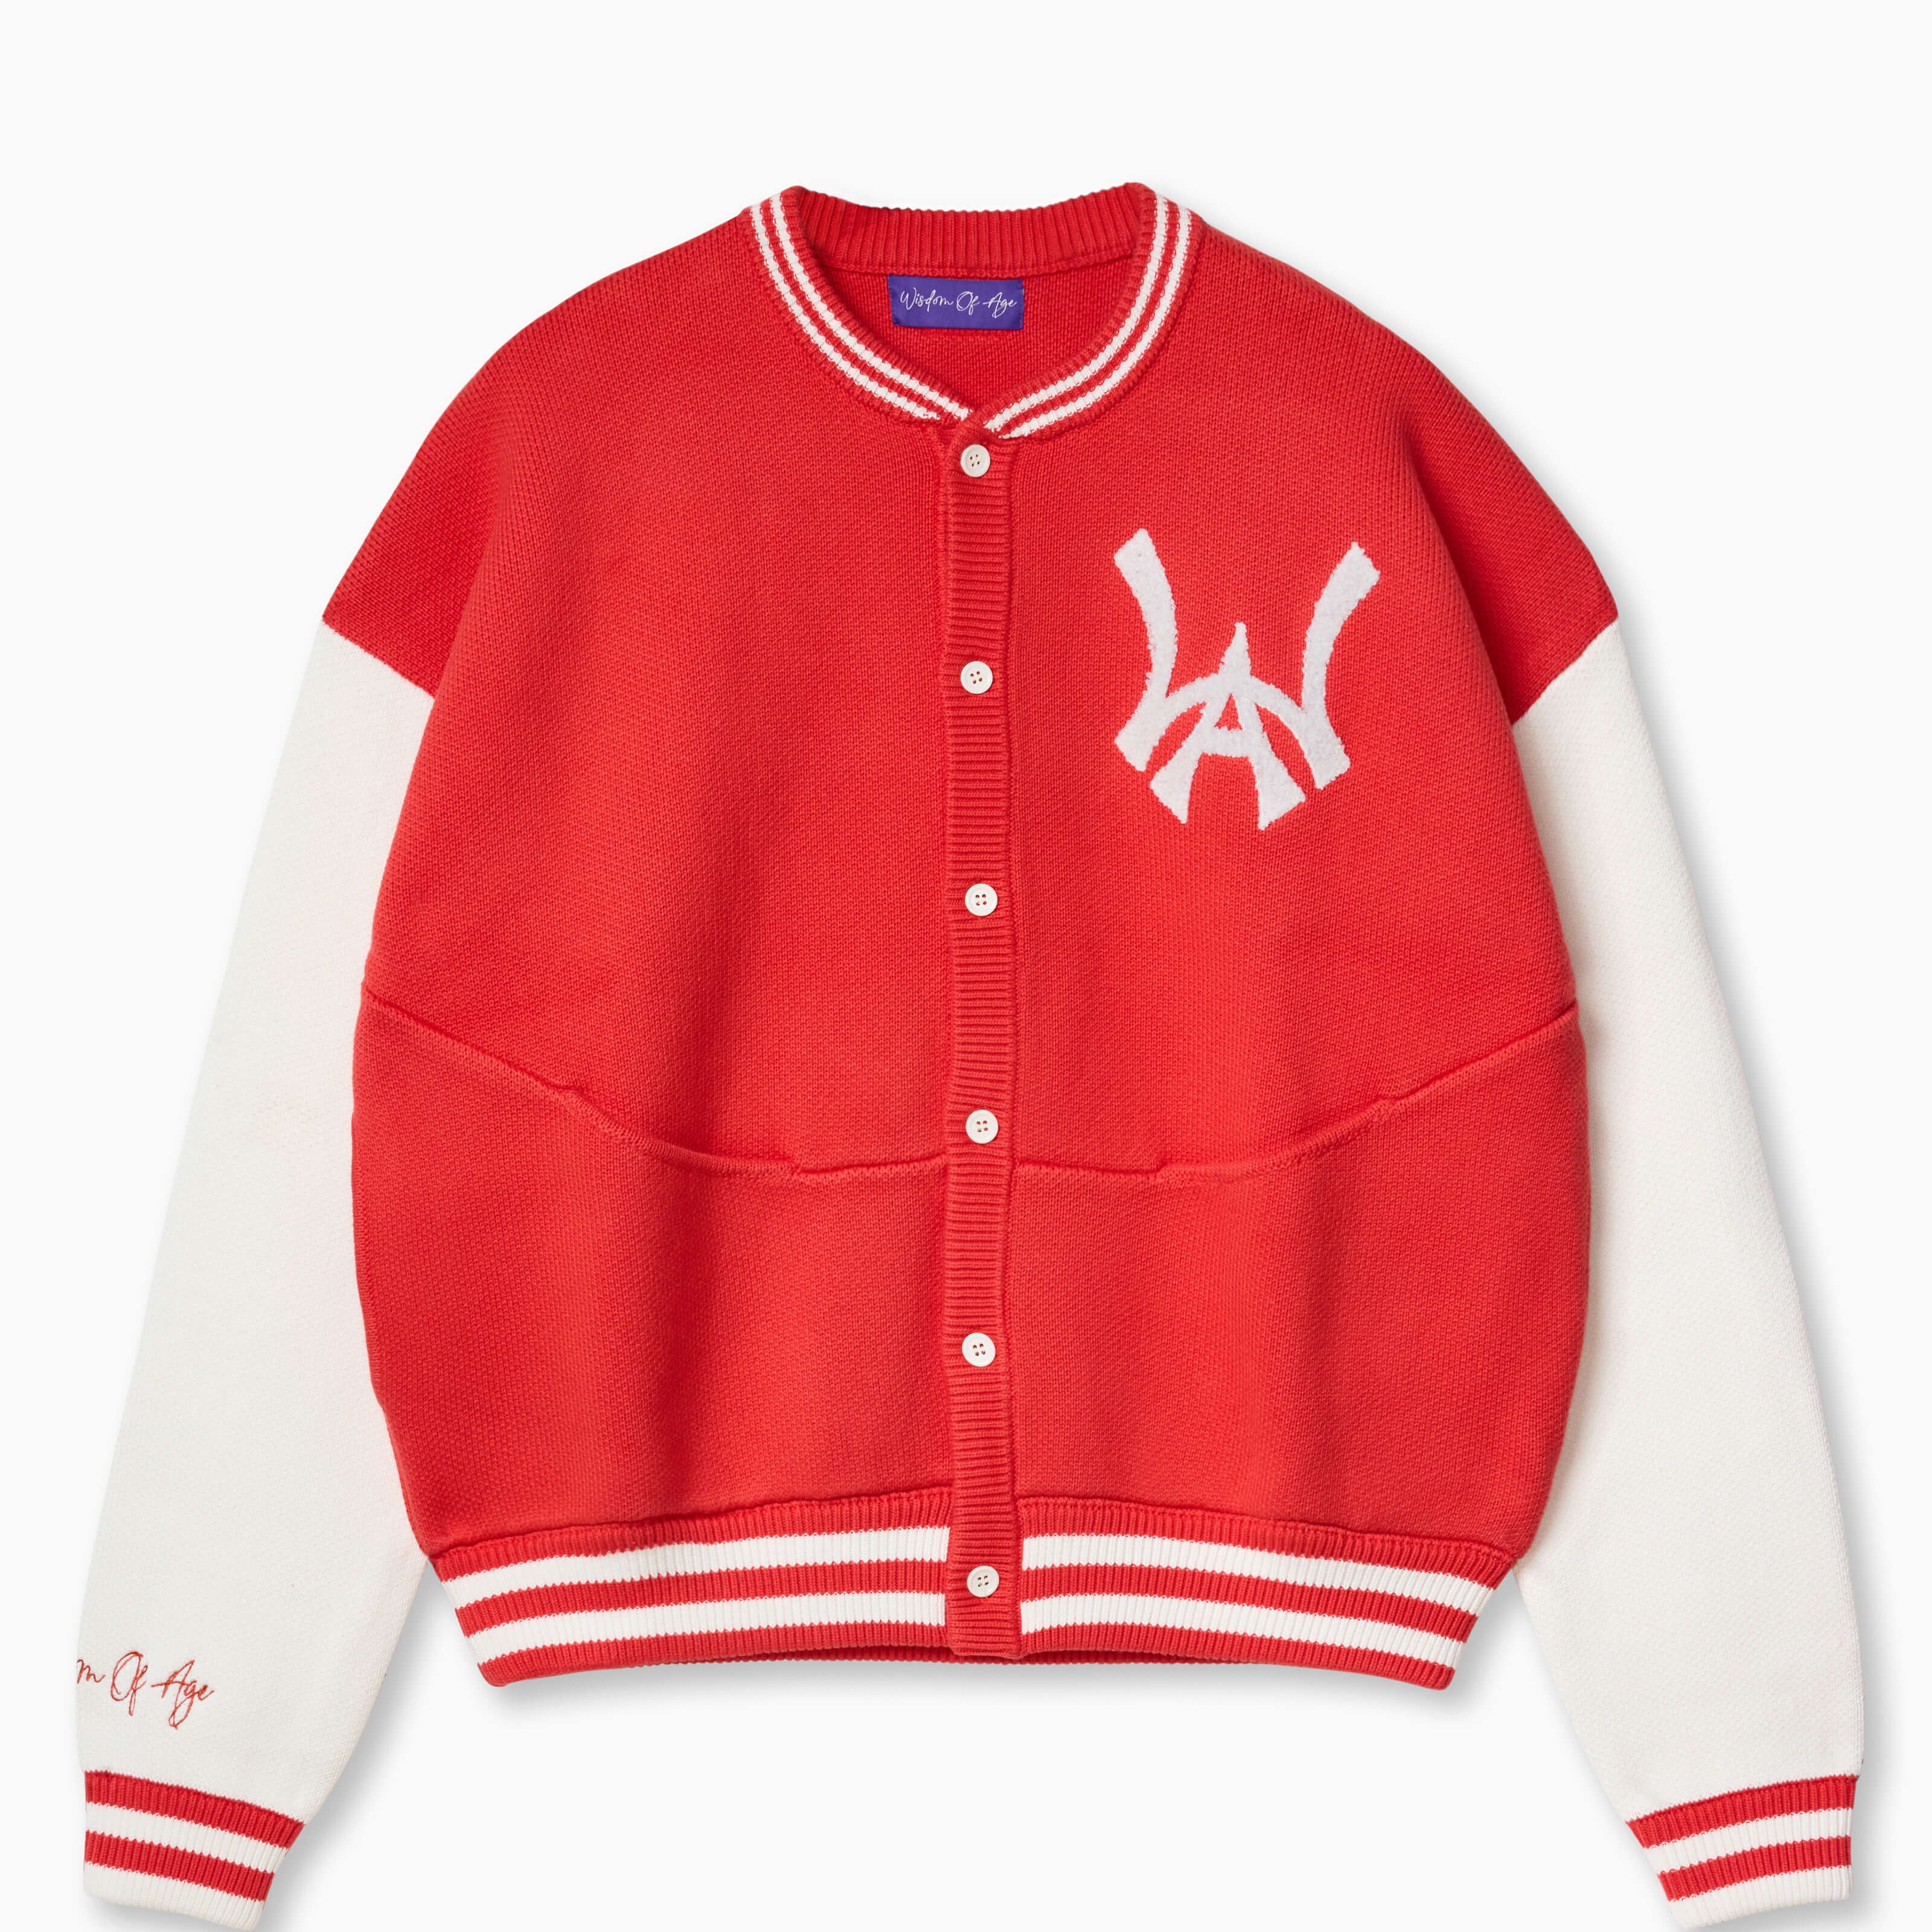 Wisdom of Age University Cardigan. Color wave of Varsity Red and varsity design, with WA logo on the left chest and the brand name  “Wisdom of Age” written in script cursive on the right sleeve. Featuring a 5 button placket with dual side seam slip-in pockets.